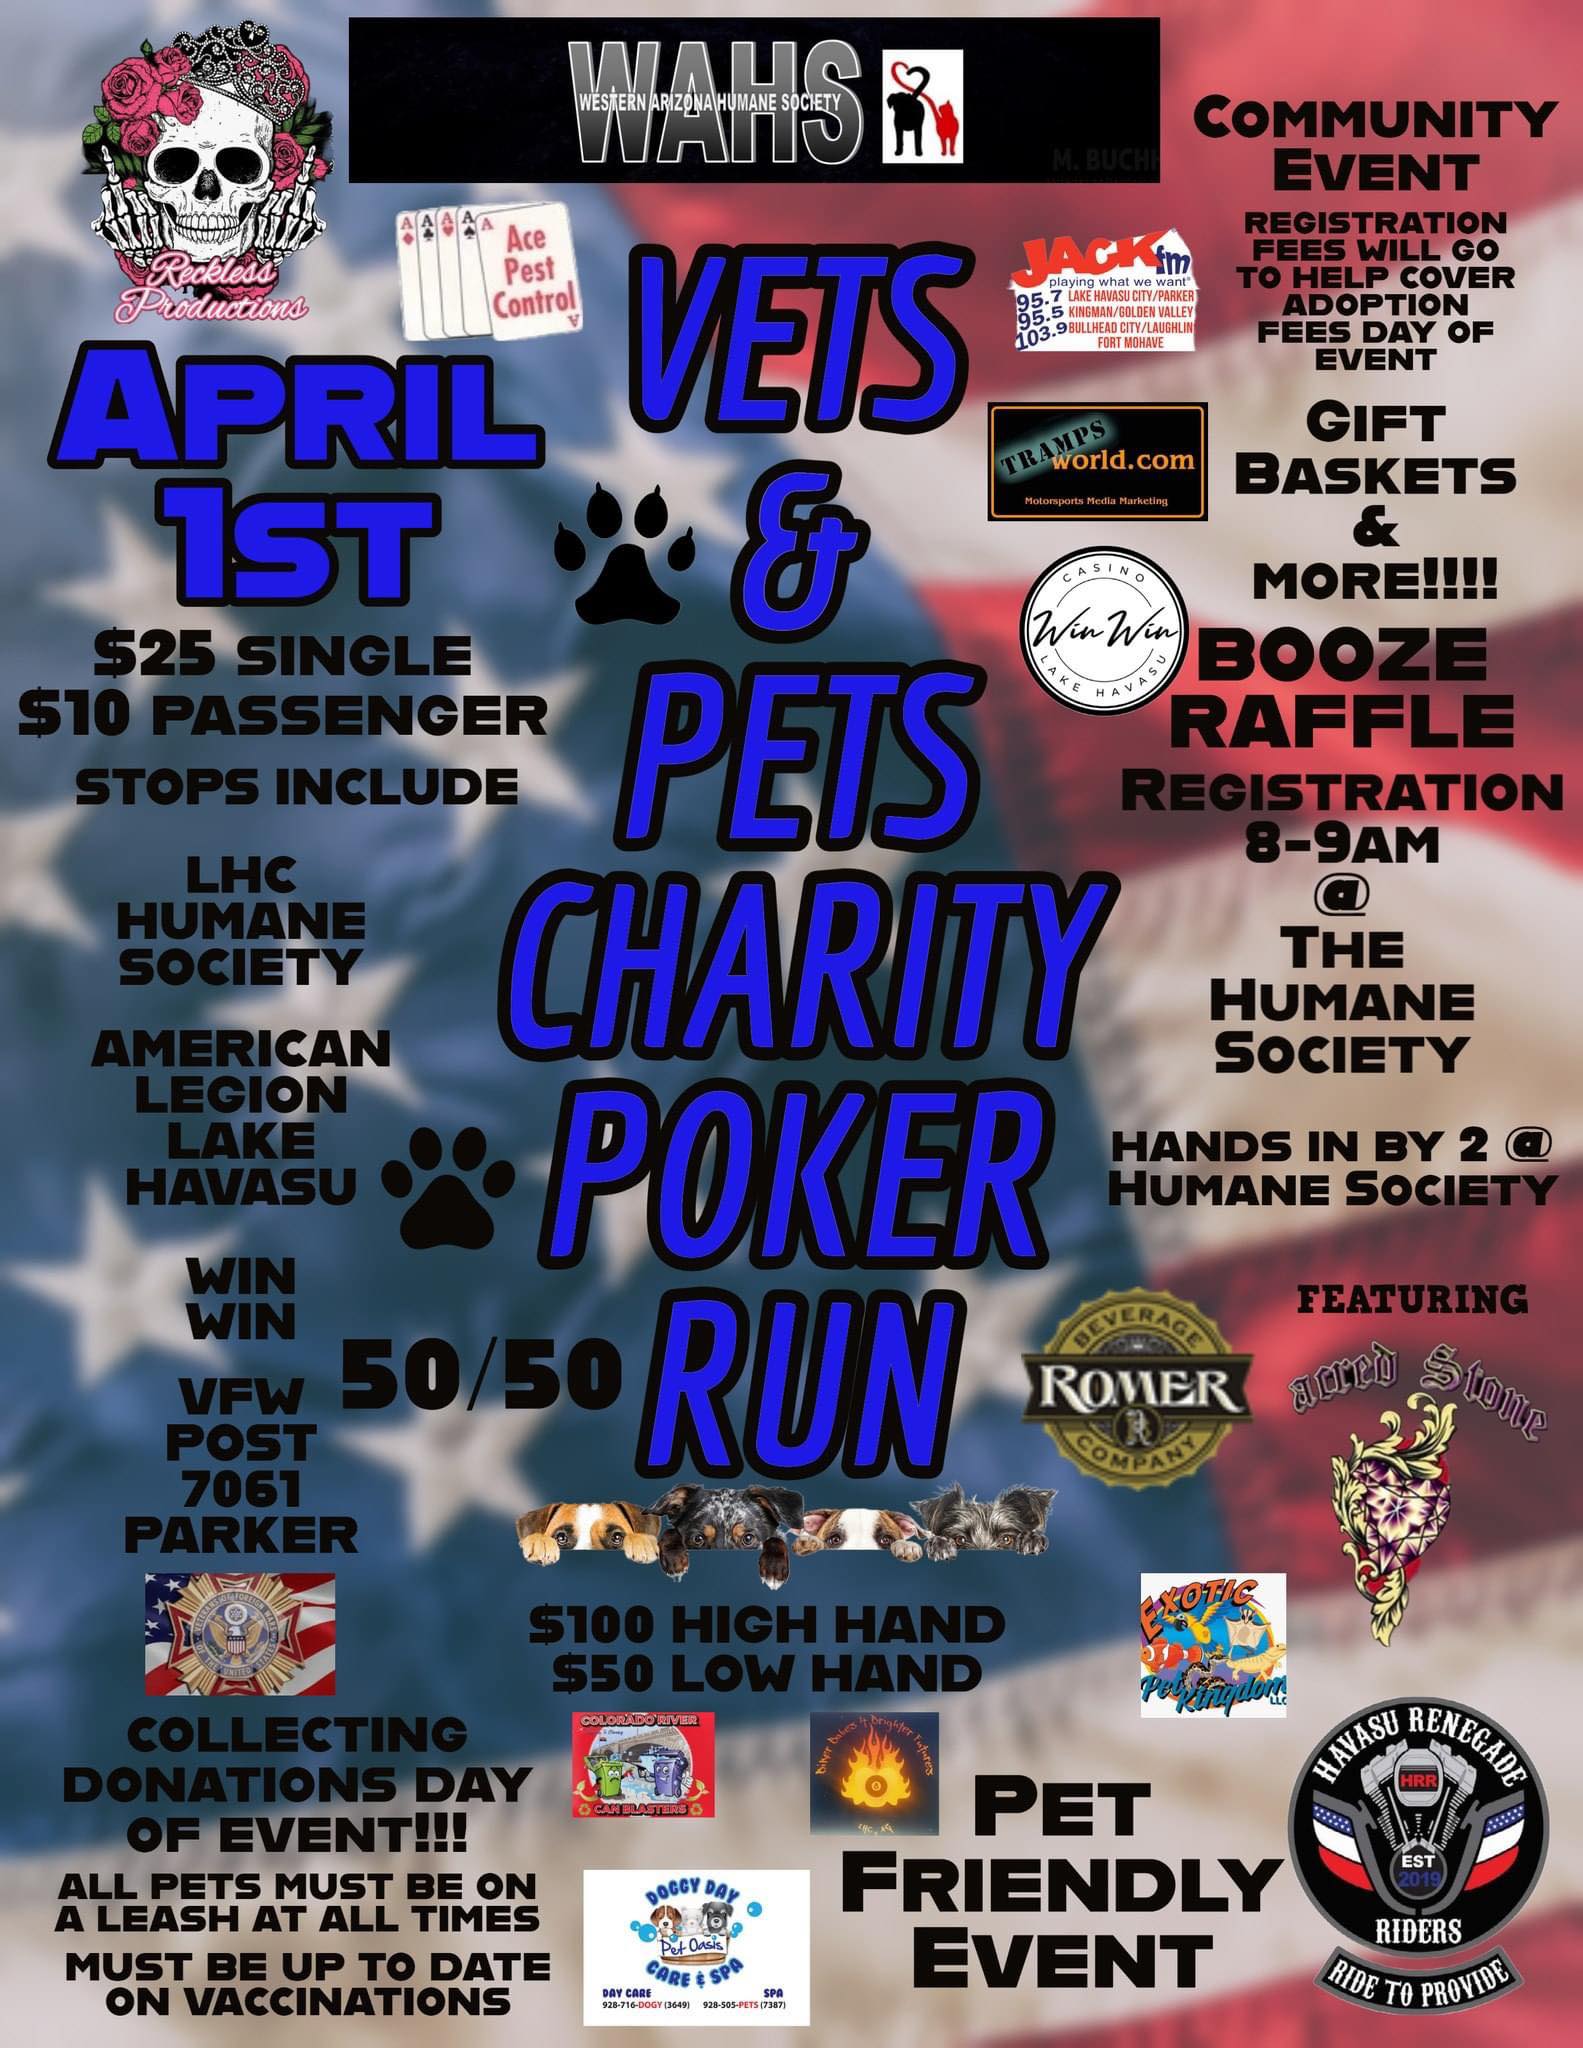 Vets And Pets Charity Poker Run